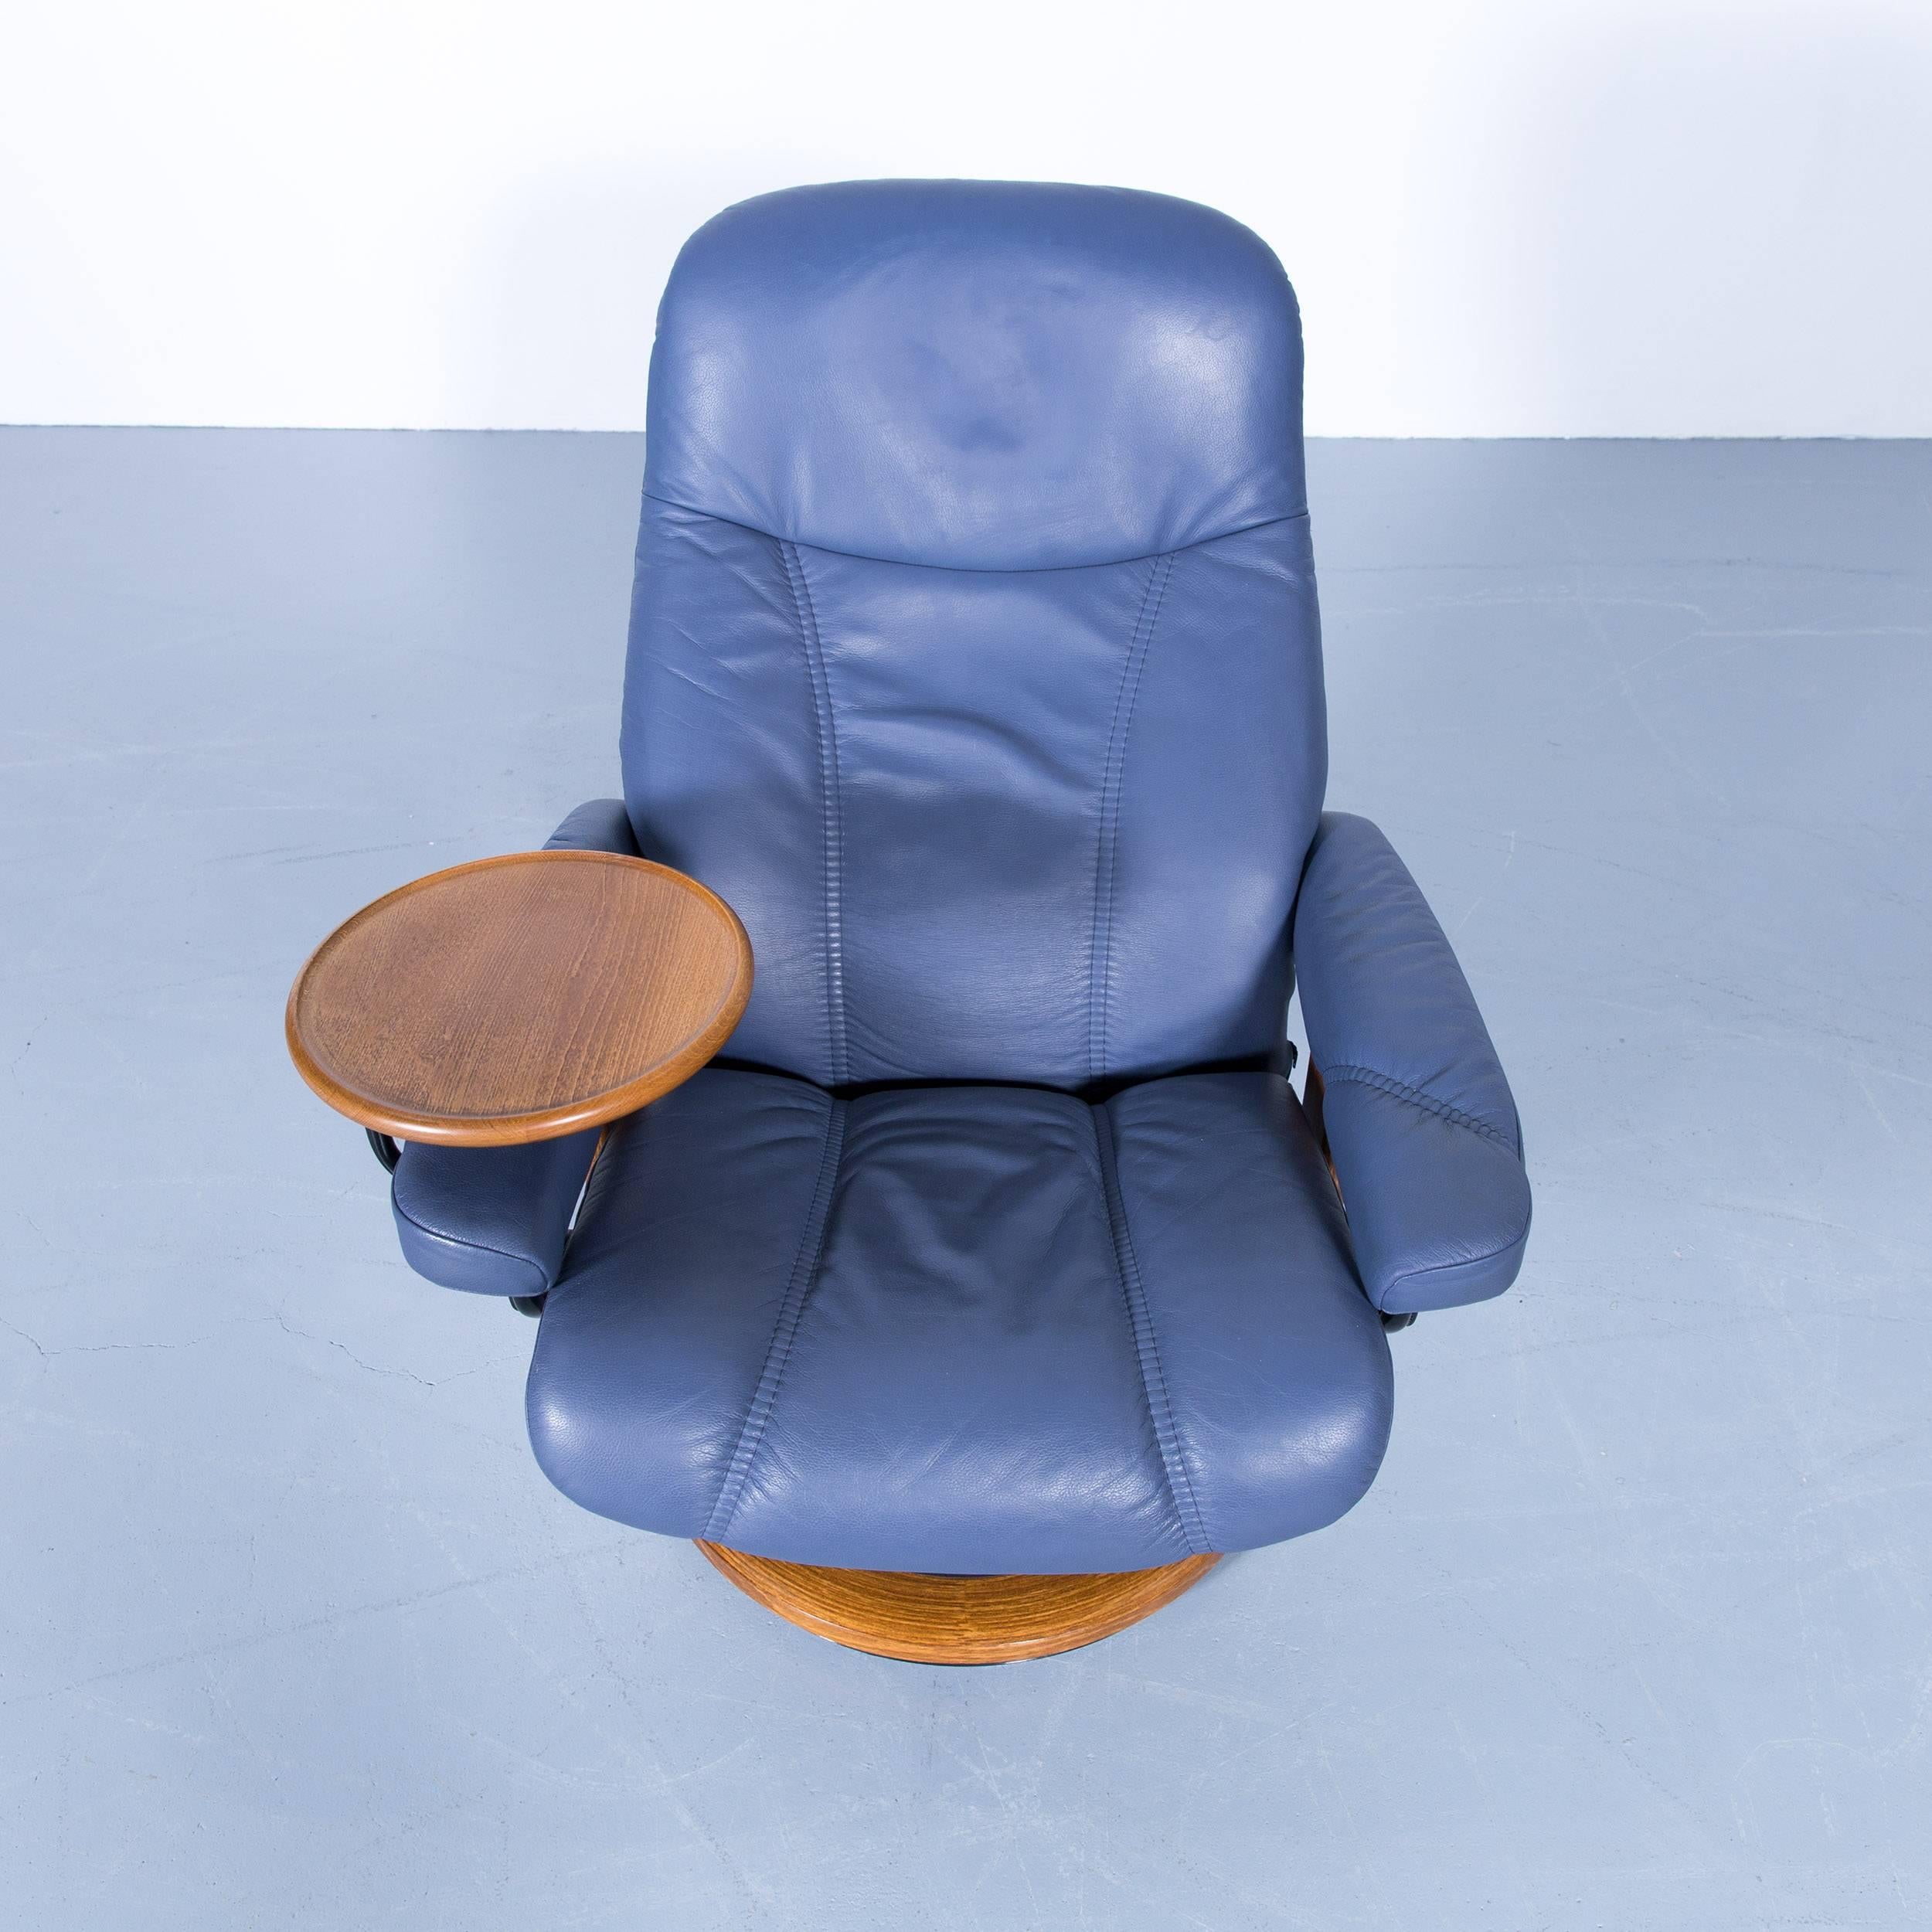 Stressless Consul Relax Armchair and Footstool Set Blue Leather Relax Function 2